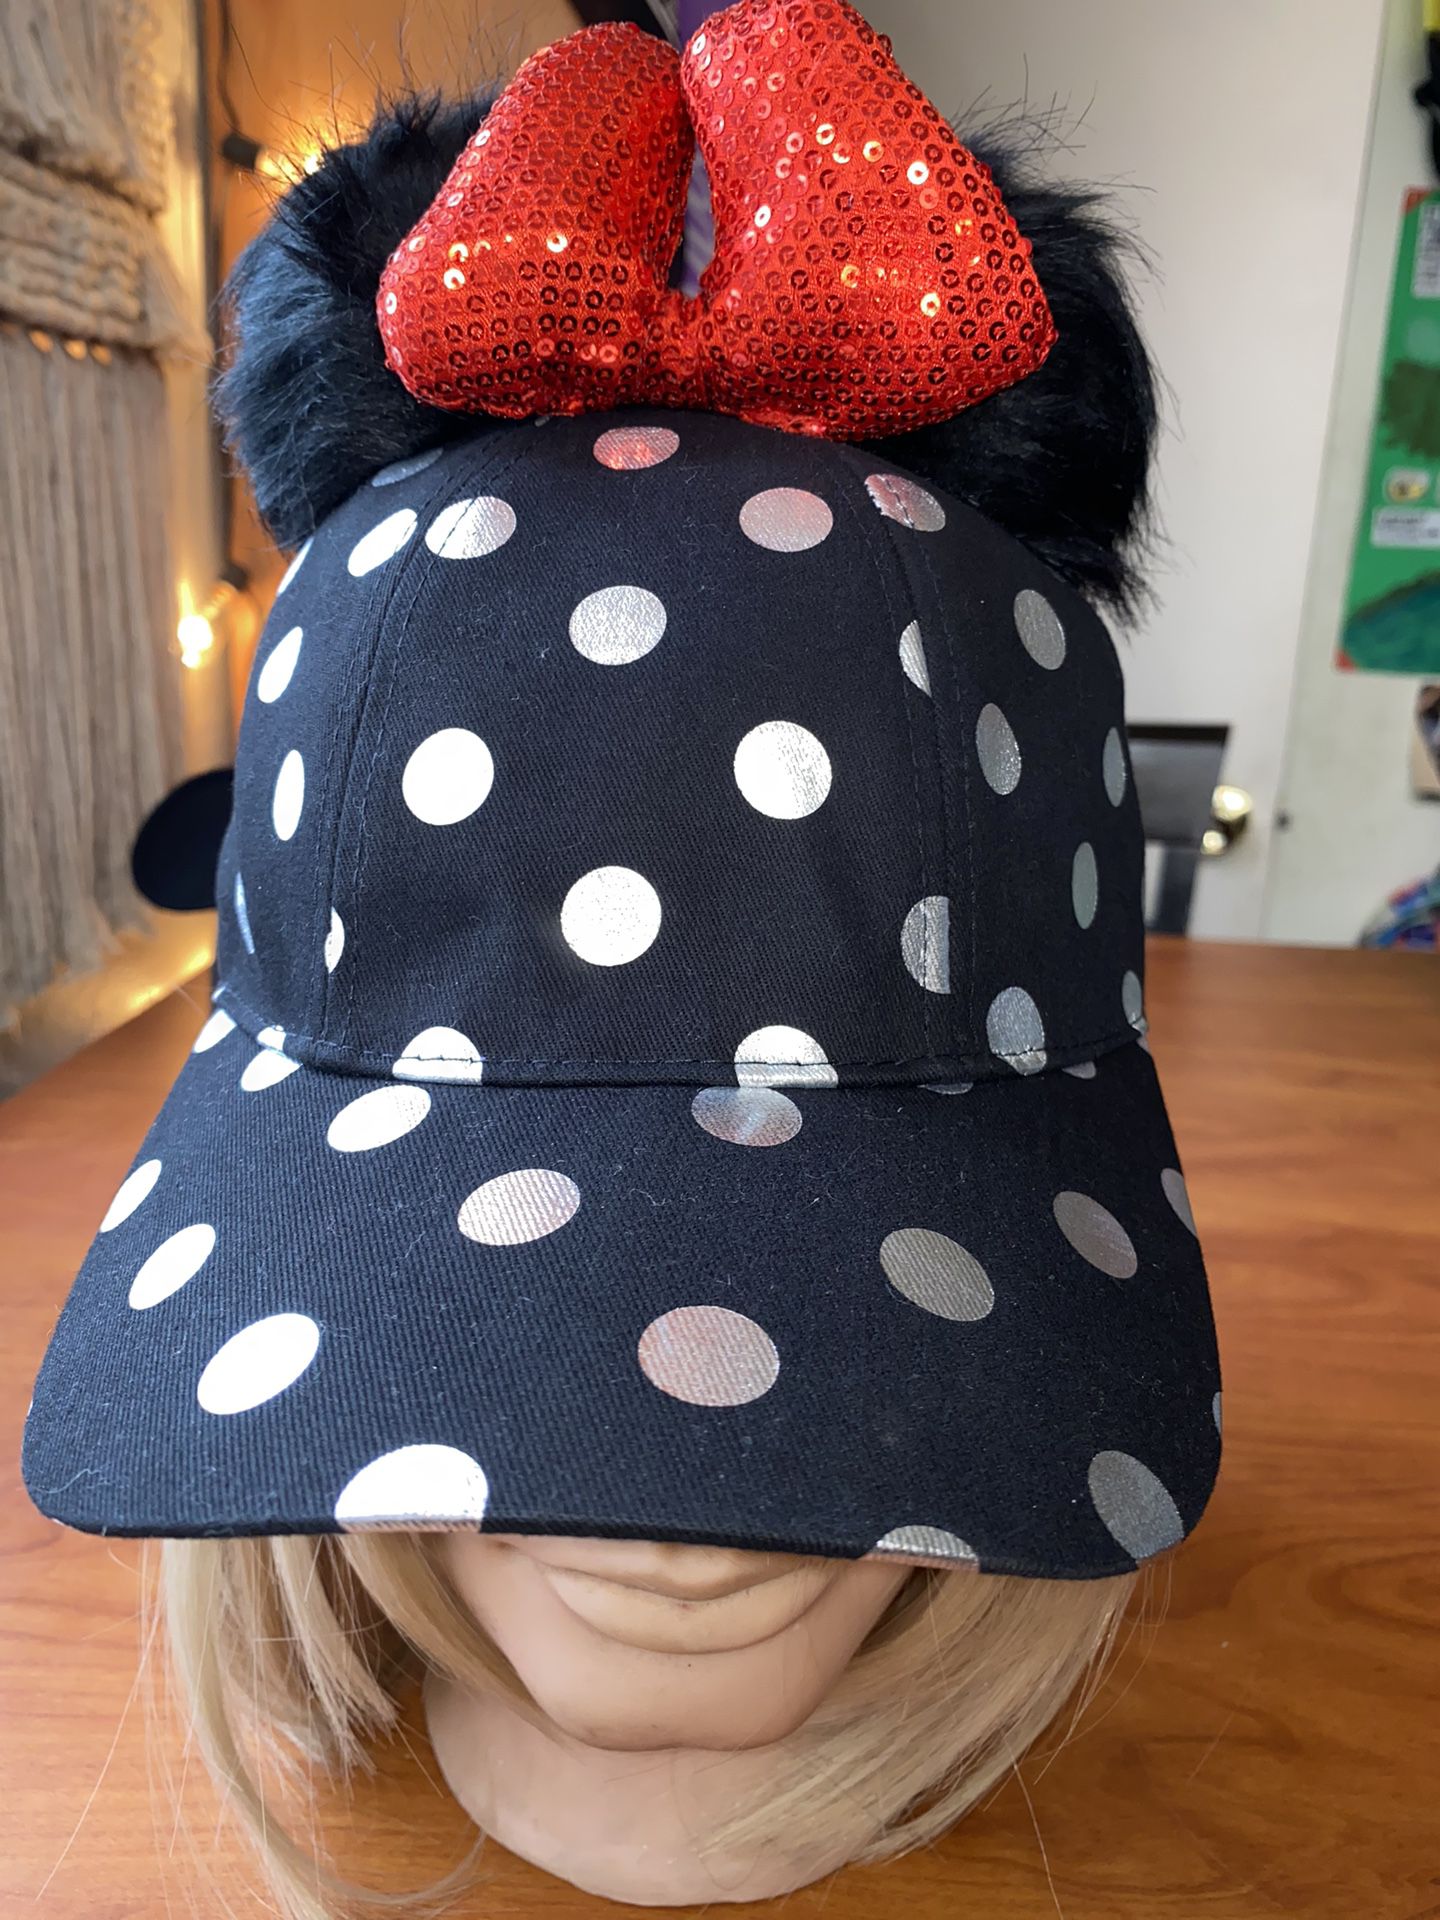 Disney Parks Minnie Mouse Pom Pom Polka Dot Sequin Bow Black Baseball Hat  for Sale in San Diego, CA - OfferUp